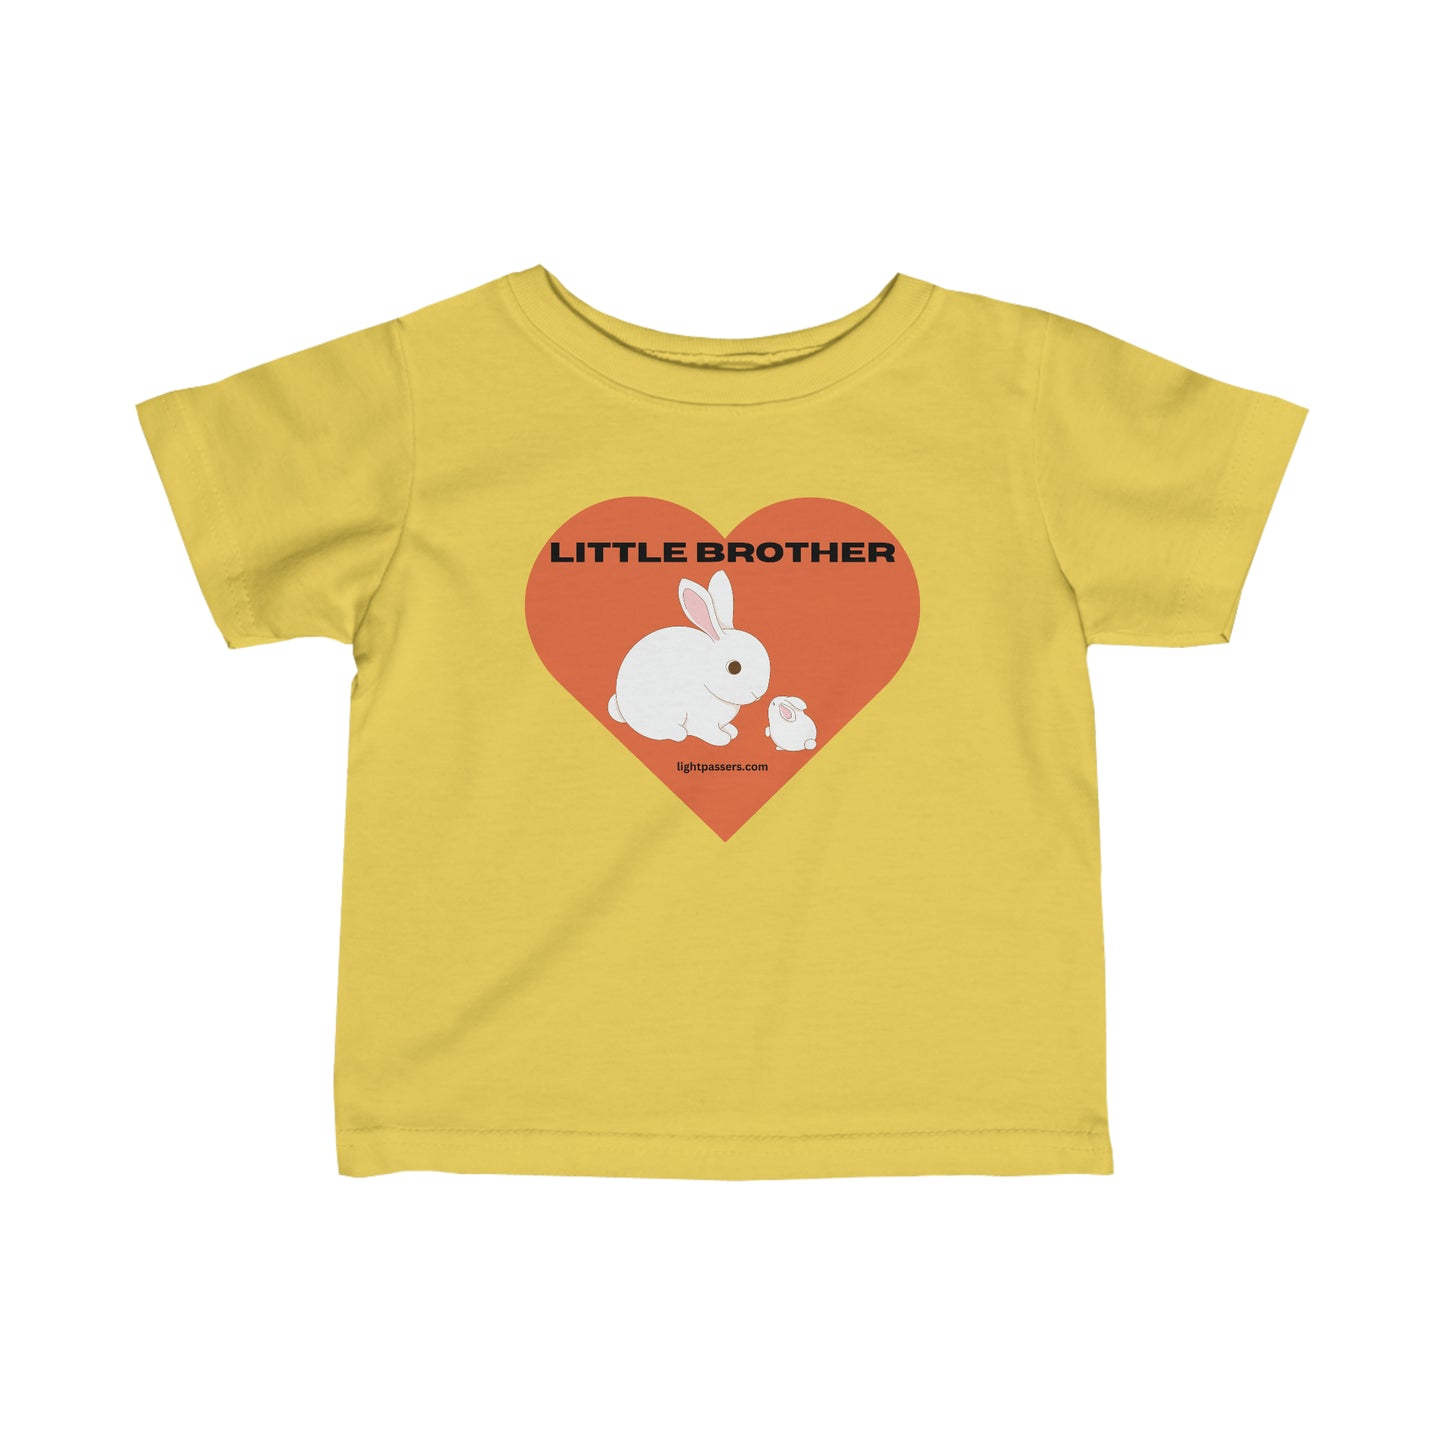 Little Brother Baby T-shirt featuring a yellow shirt with a rabbit and heart design. Infant tee with side seams, ribbed knitting, and taped shoulders for comfort and durability.